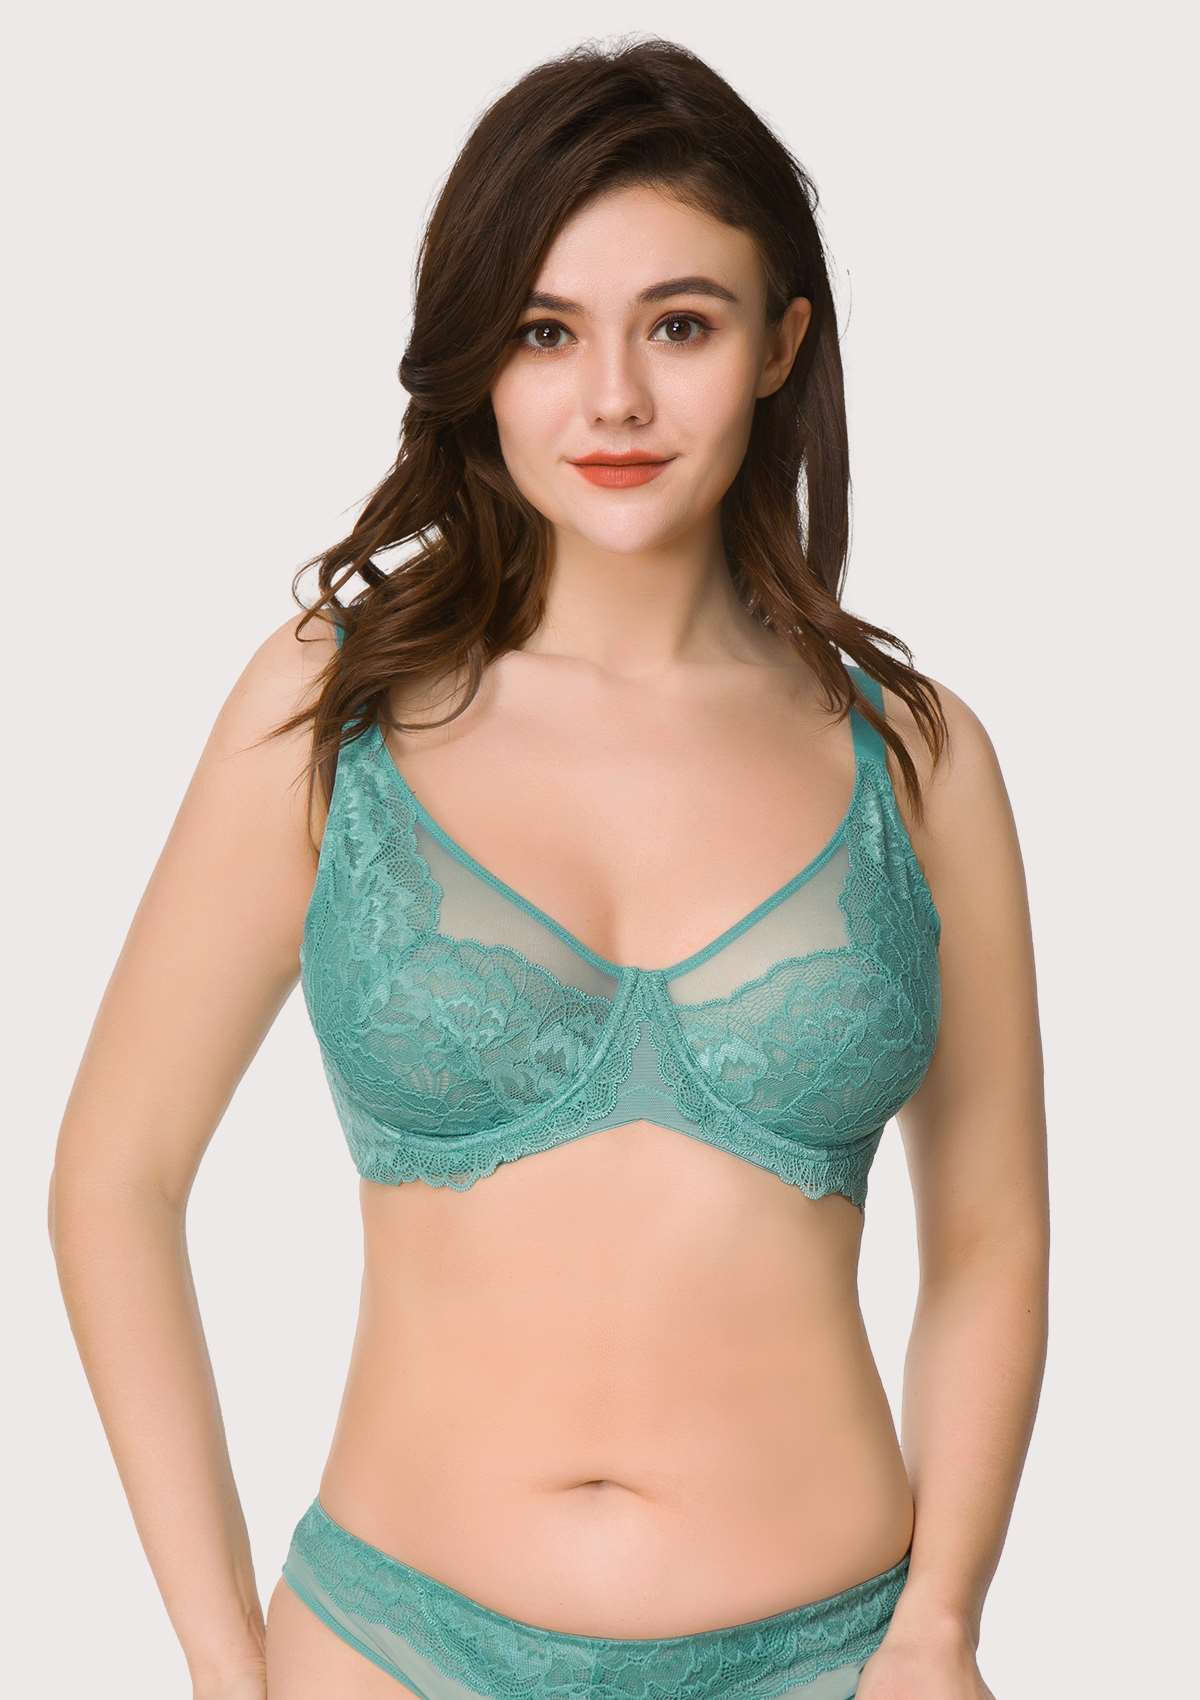 HSIA Peony Lace Unlined Supportive Underwire Bra - Dark Blue / 36 / D